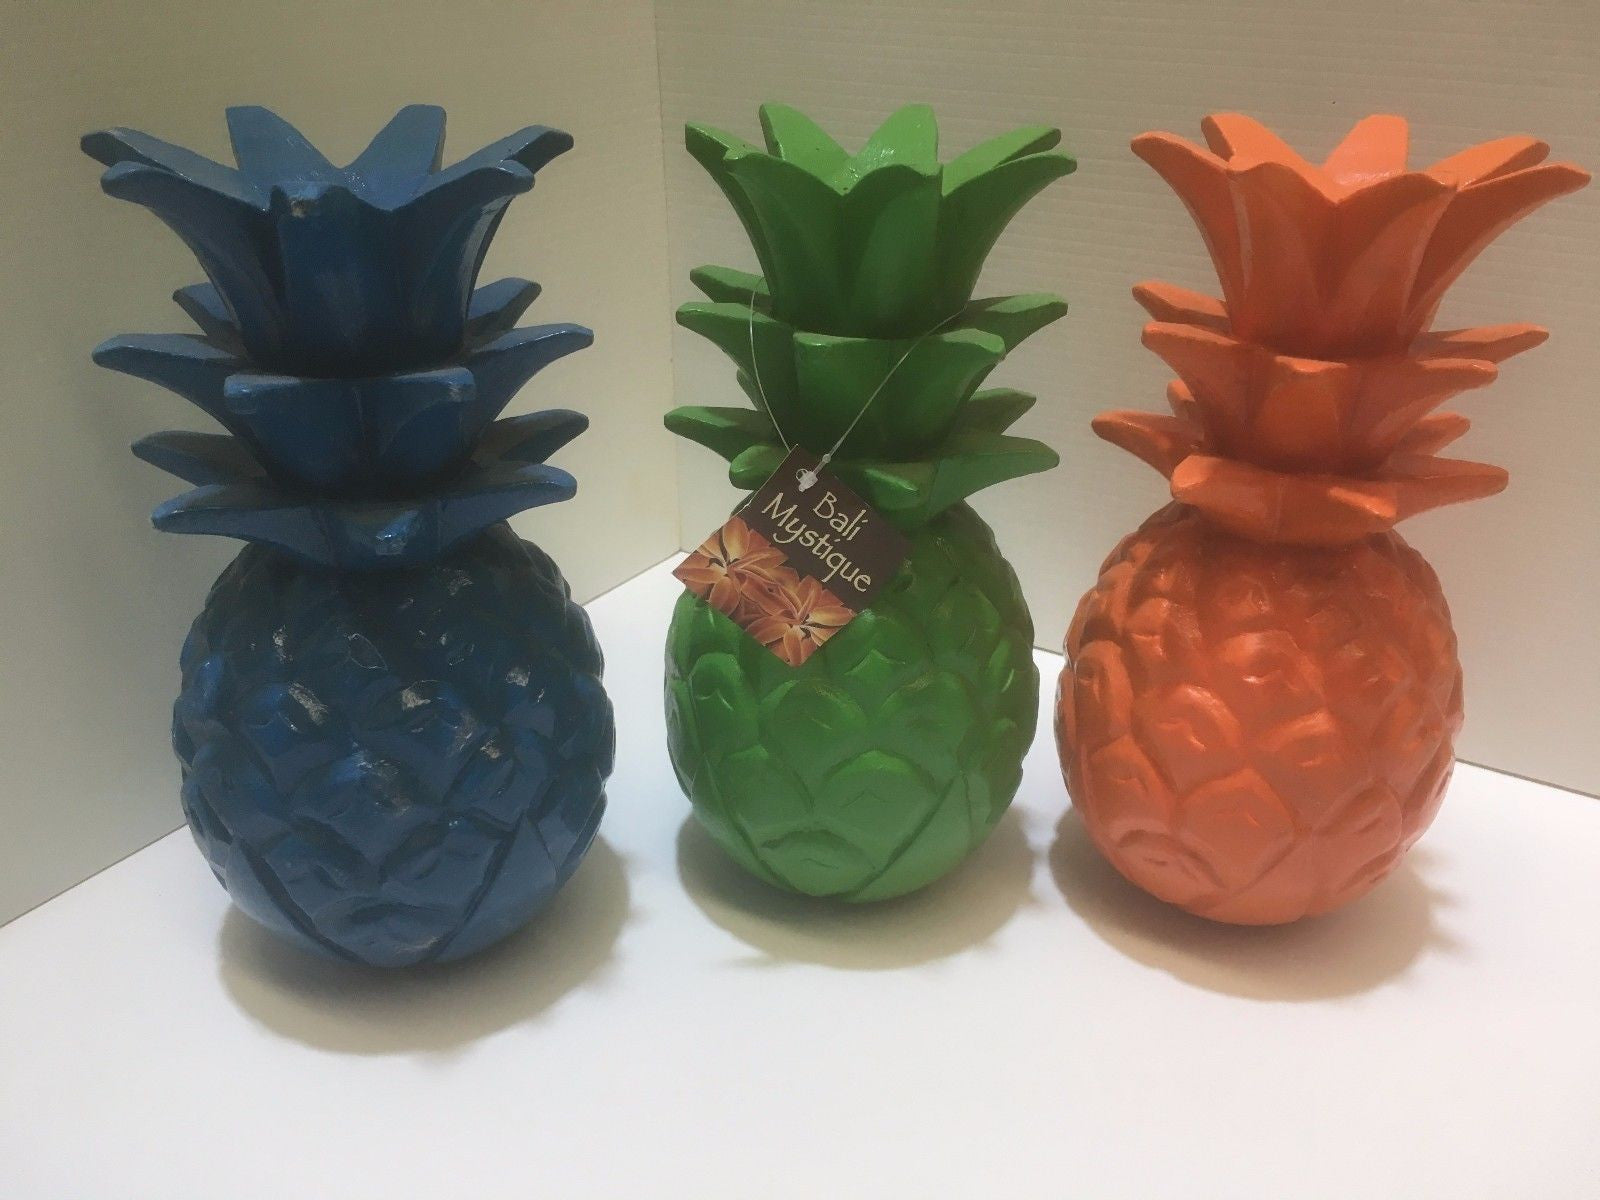 Hand Carved Wooden Pineapple